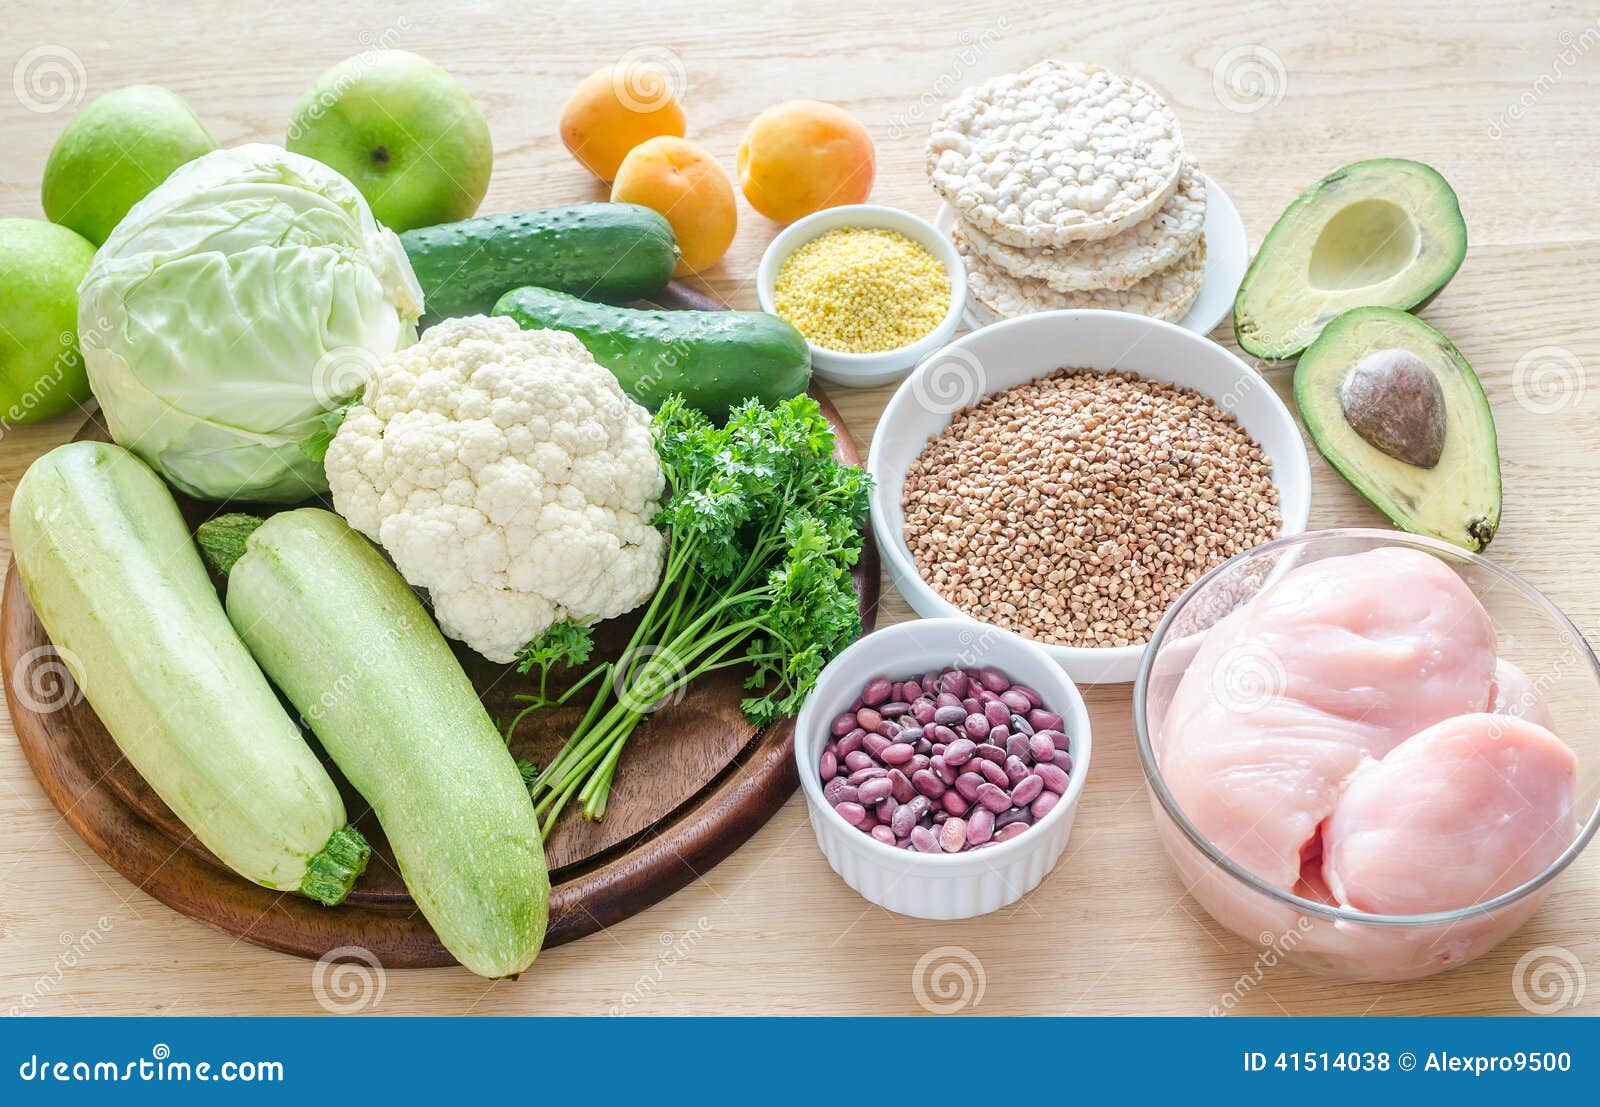 hypoallergenic diet: products of different groups